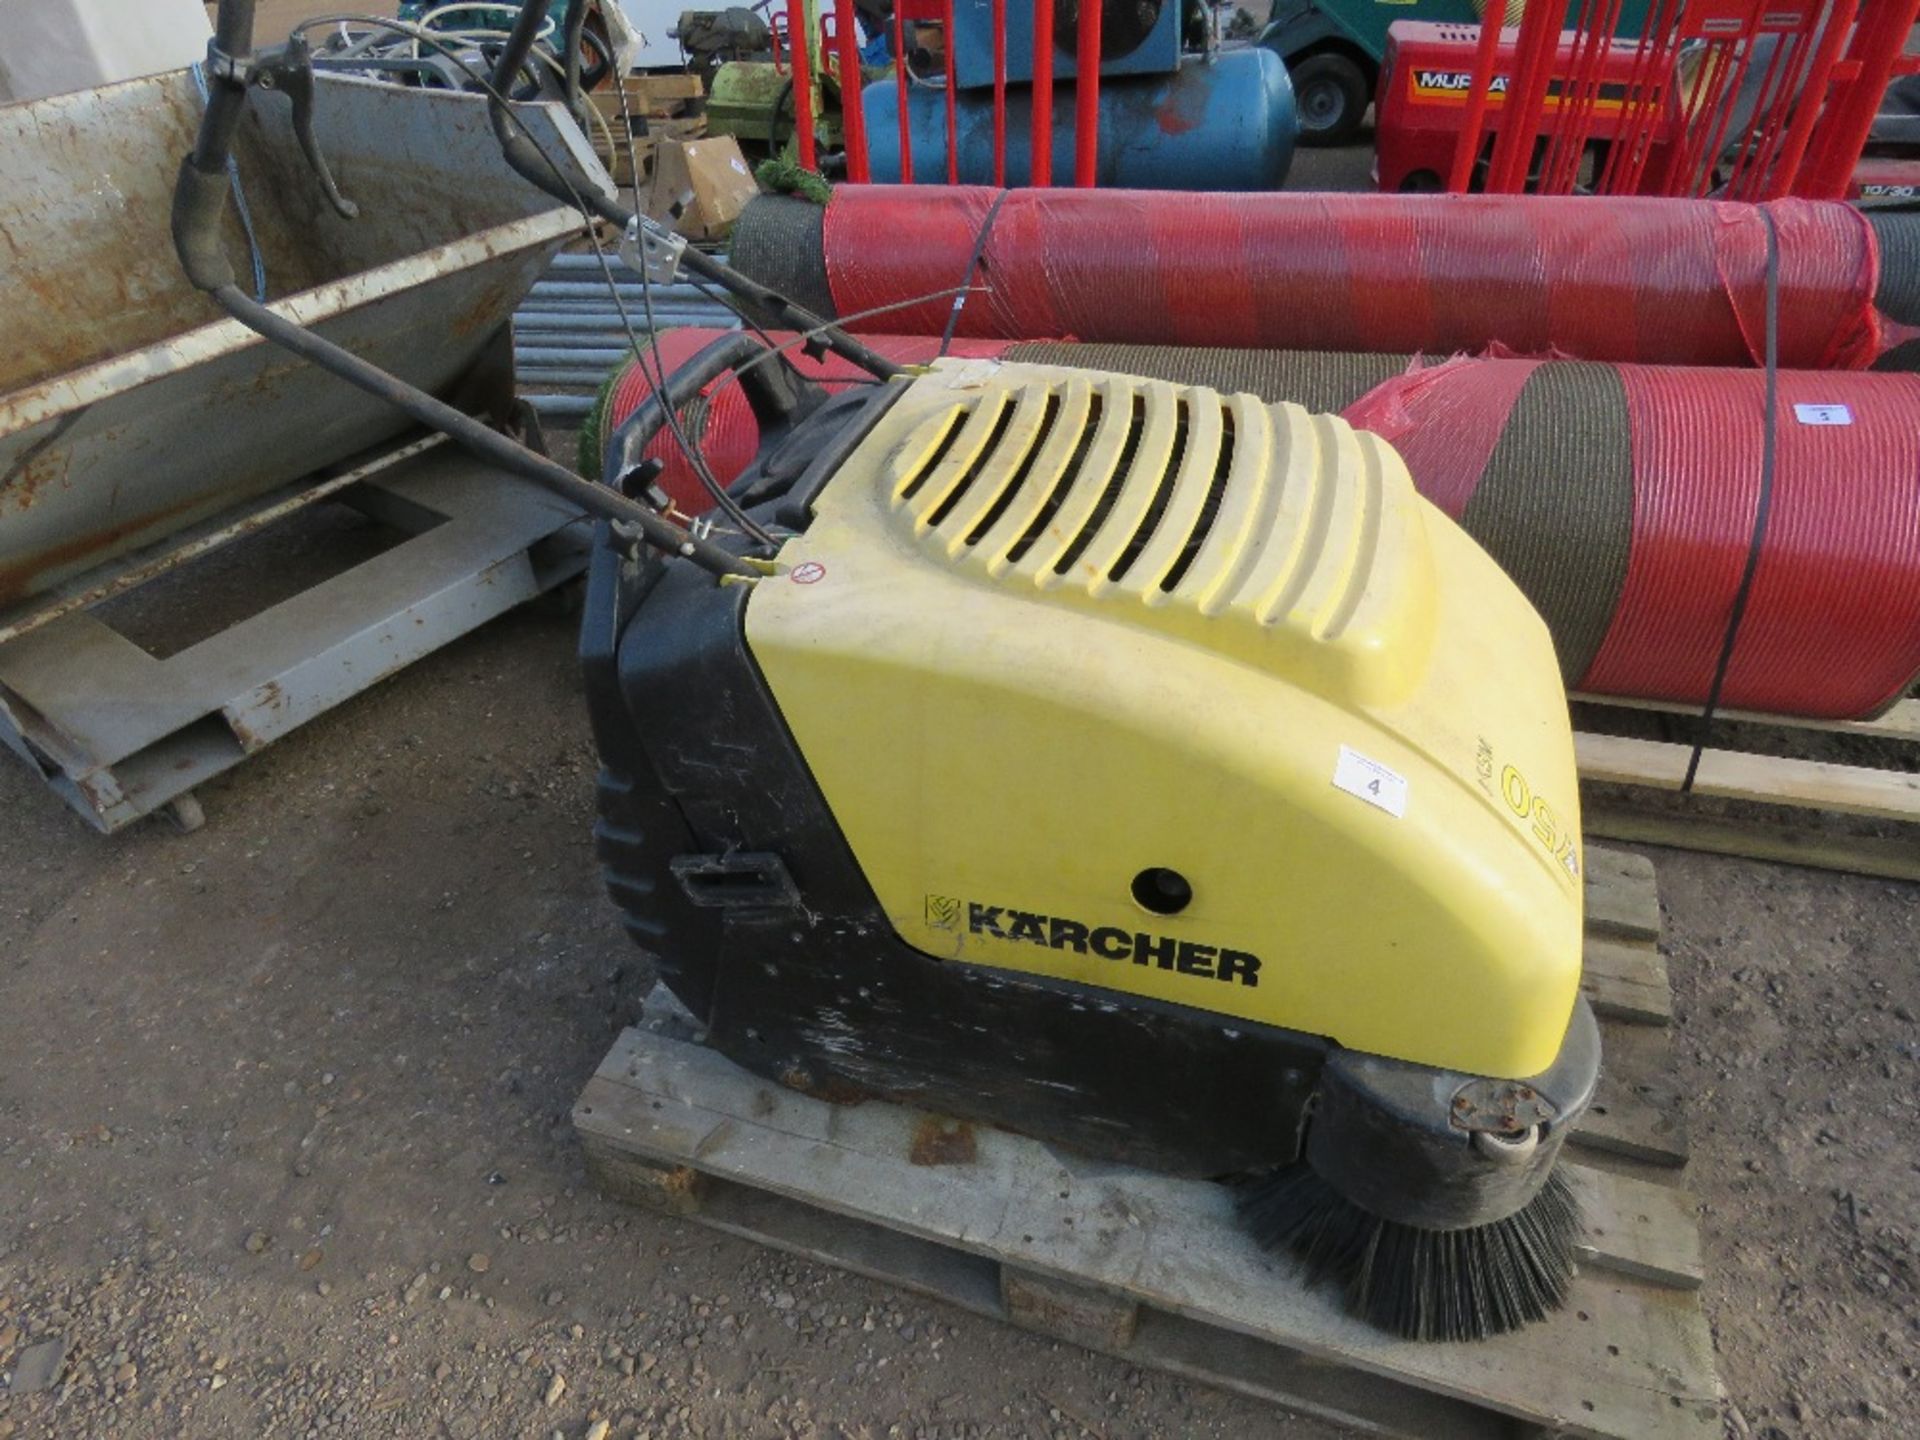 KARCHER KSM750 PETROL ENGINED PEDESTRIAN SWEEPER UNIT, LOW HOURS, CONDITION UNKNOWN. THIS LOT IS